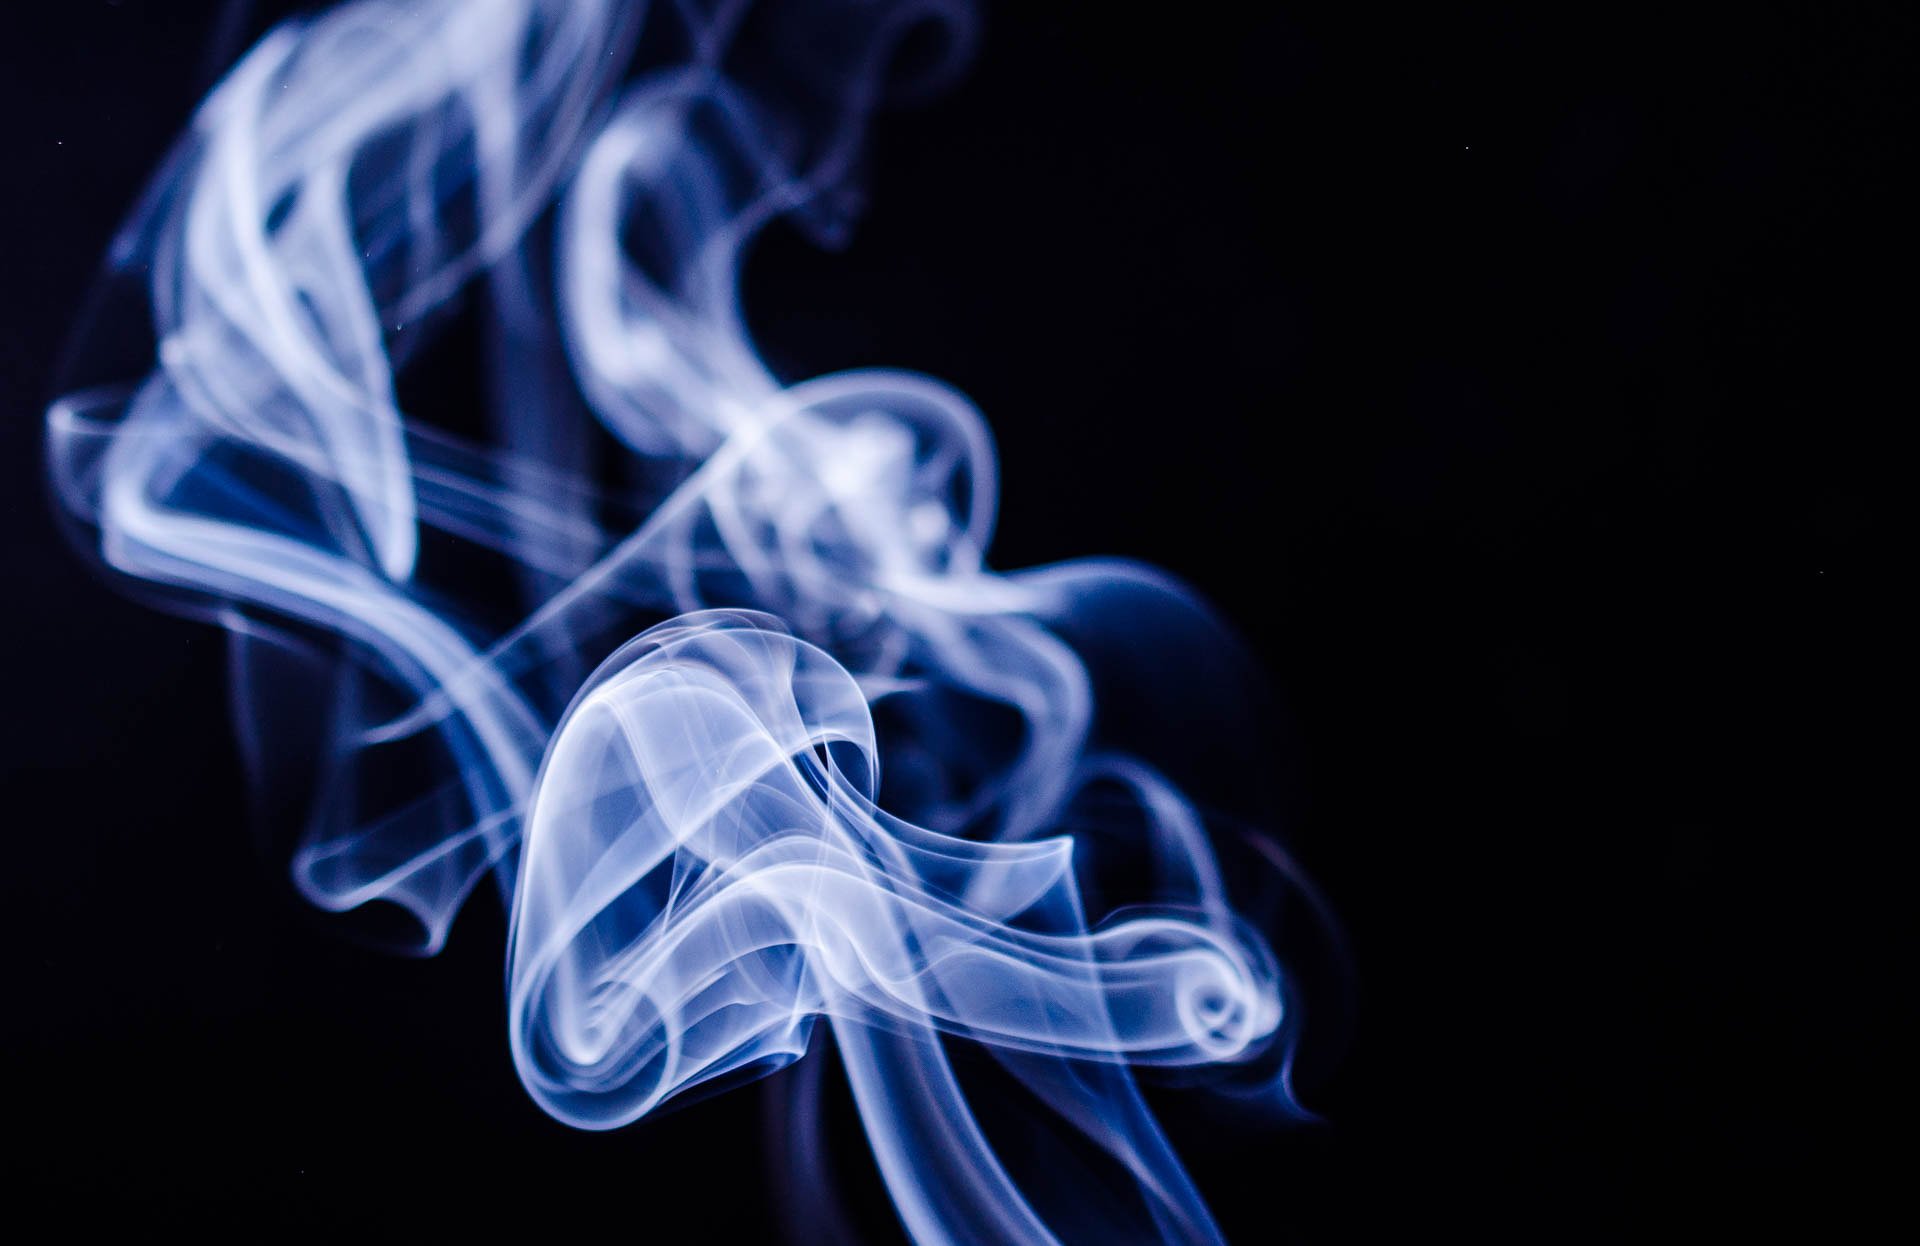 #Large-scale study explores link between smoking and DNA changes across six racial and ethnic groups